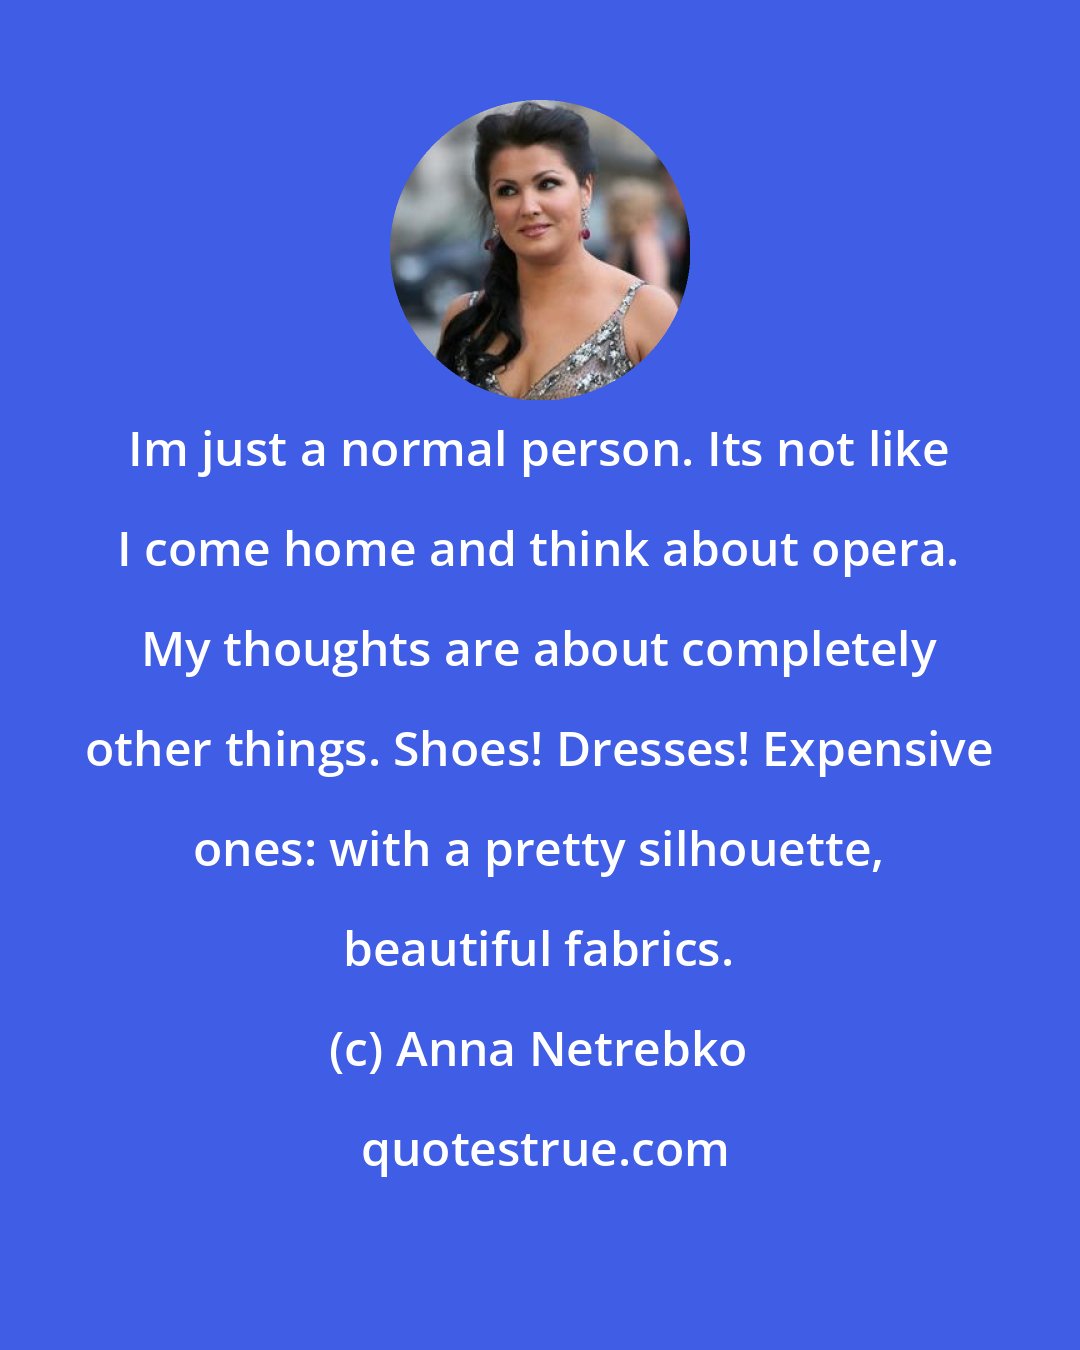 Anna Netrebko: Im just a normal person. Its not like I come home and think about opera. My thoughts are about completely other things. Shoes! Dresses! Expensive ones: with a pretty silhouette, beautiful fabrics.